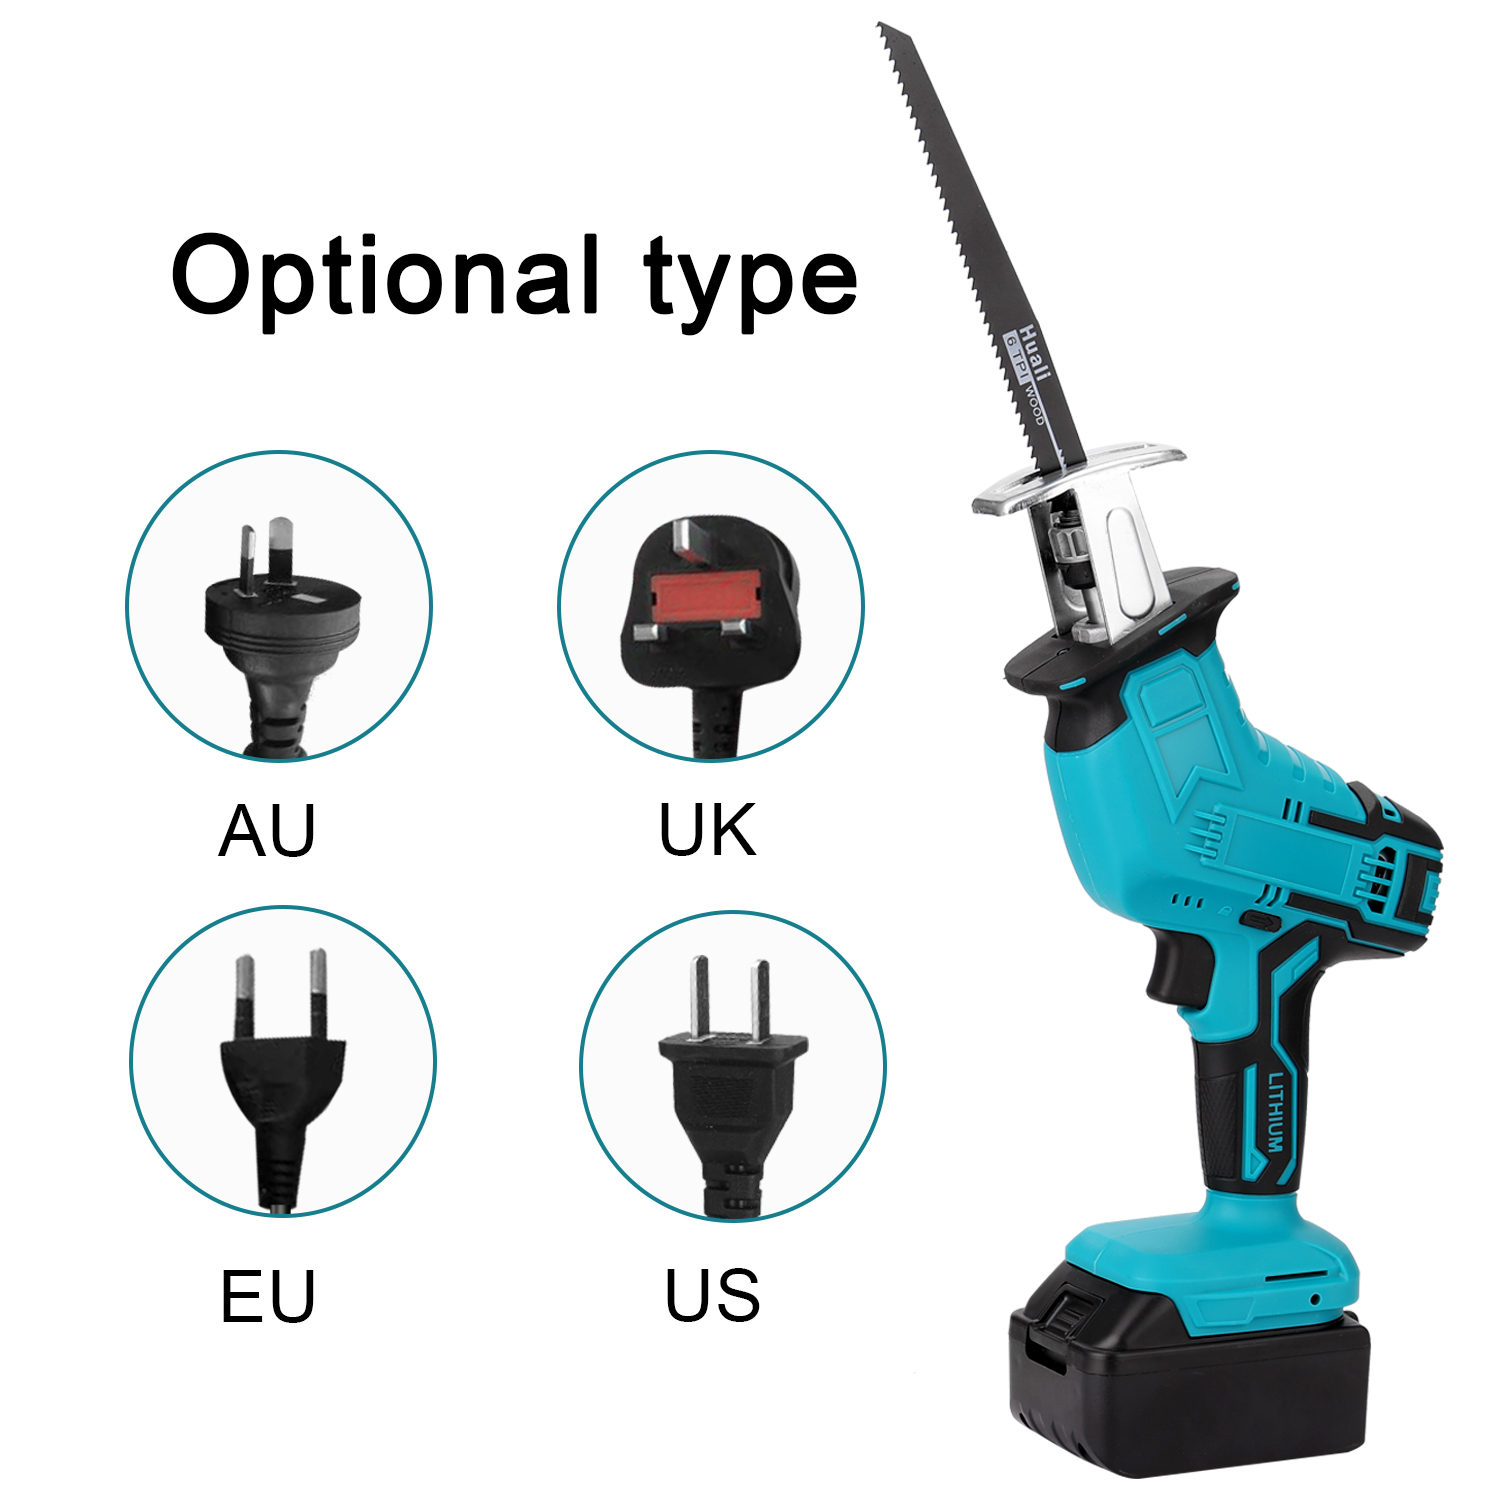 Portable Handheld Reciprocating Saws Saber Saw Electric Power Tool for Cutting Wood Iron Sheet Plastics with Lithium Battery